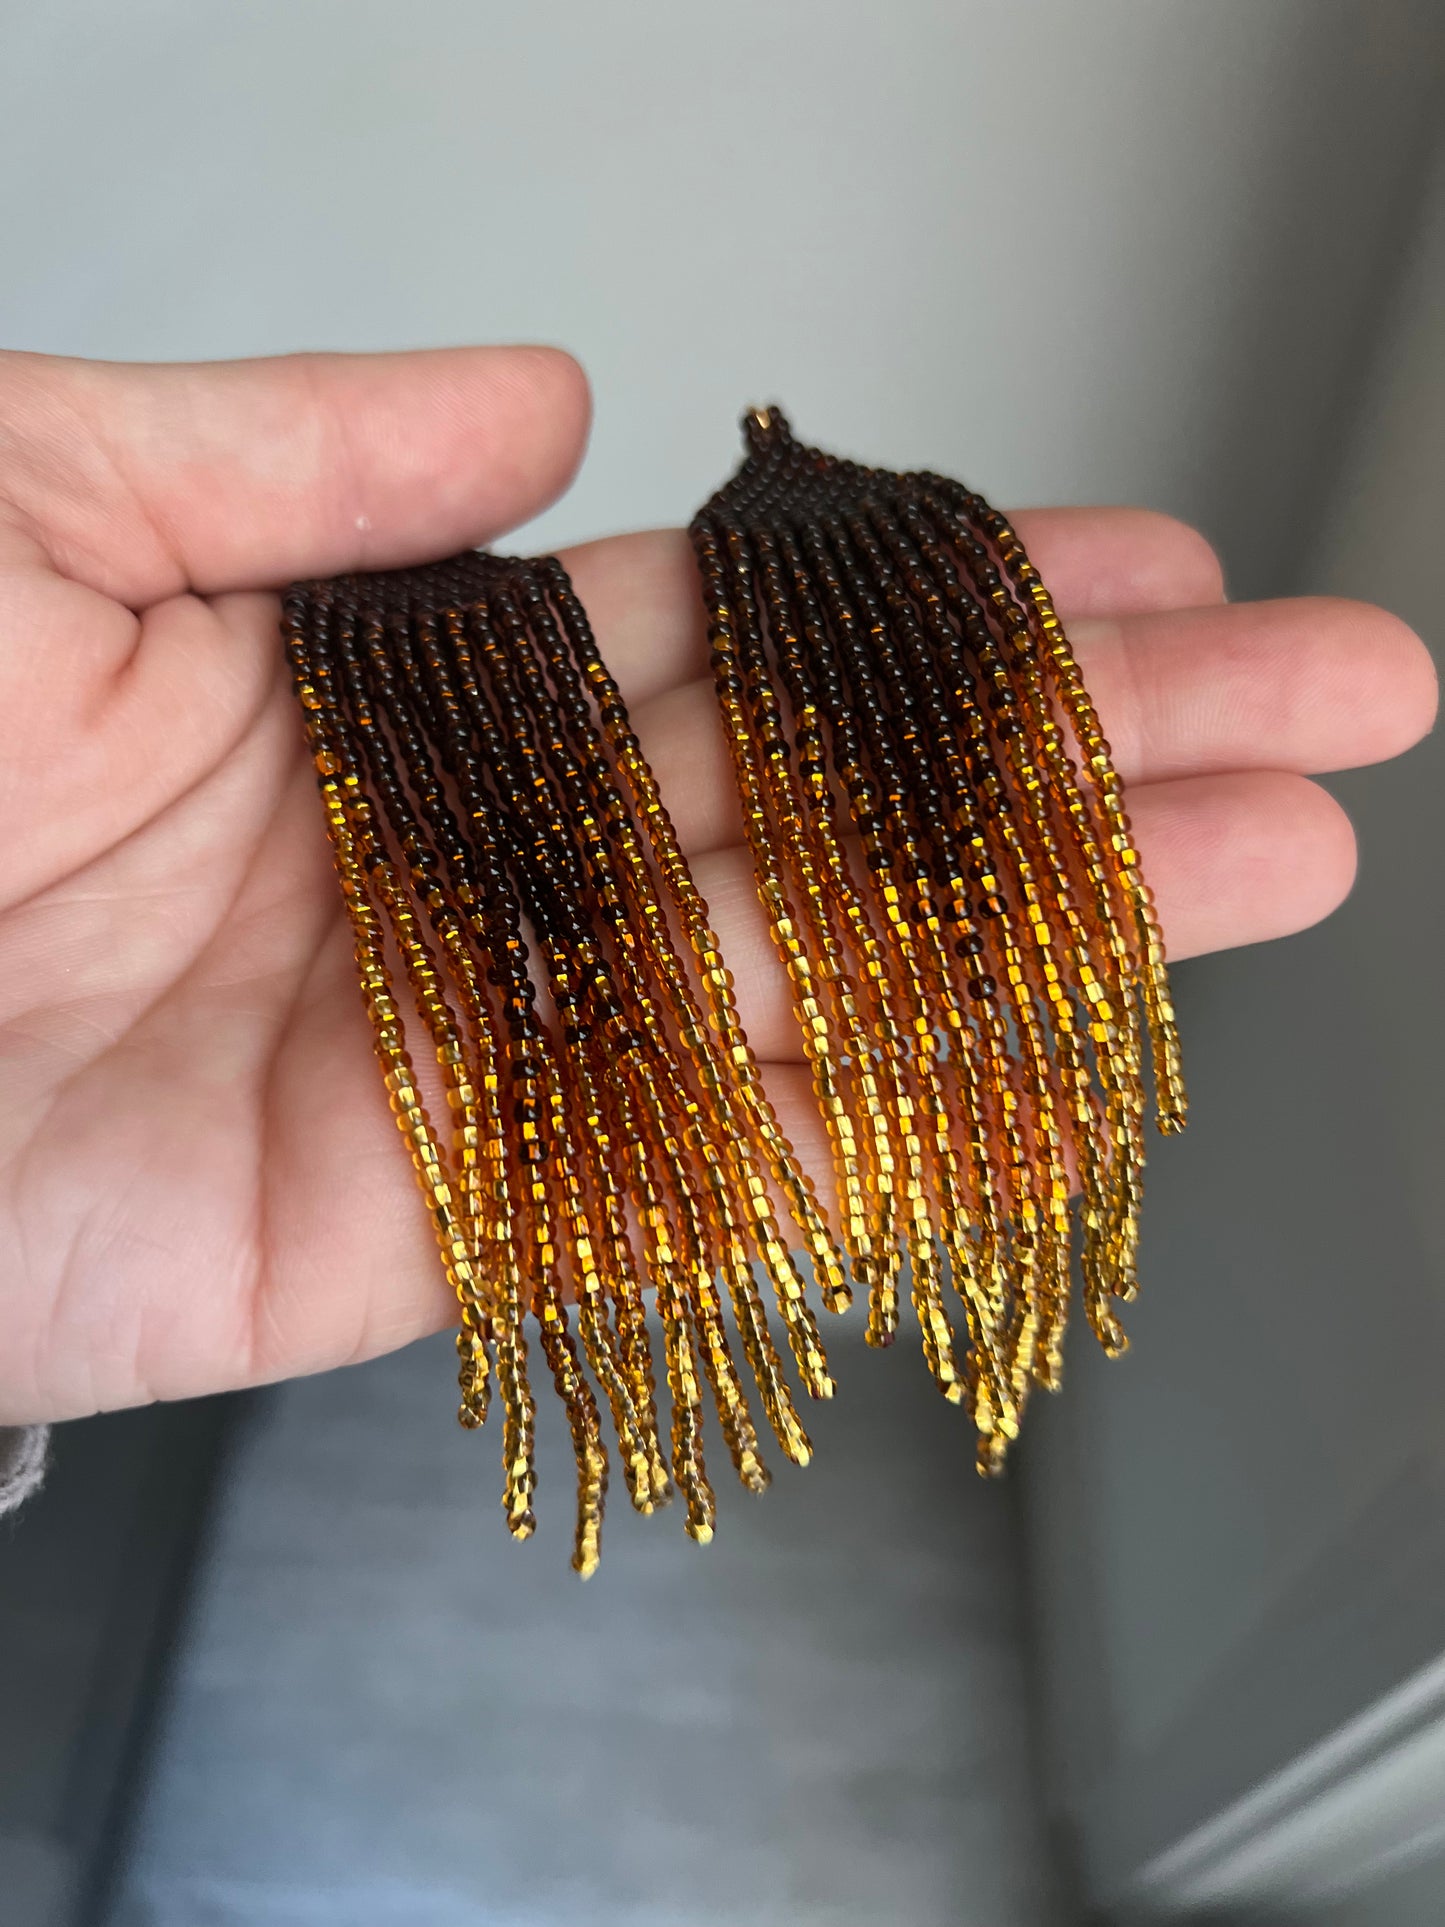 The Golden Age Seed Bead Earrings